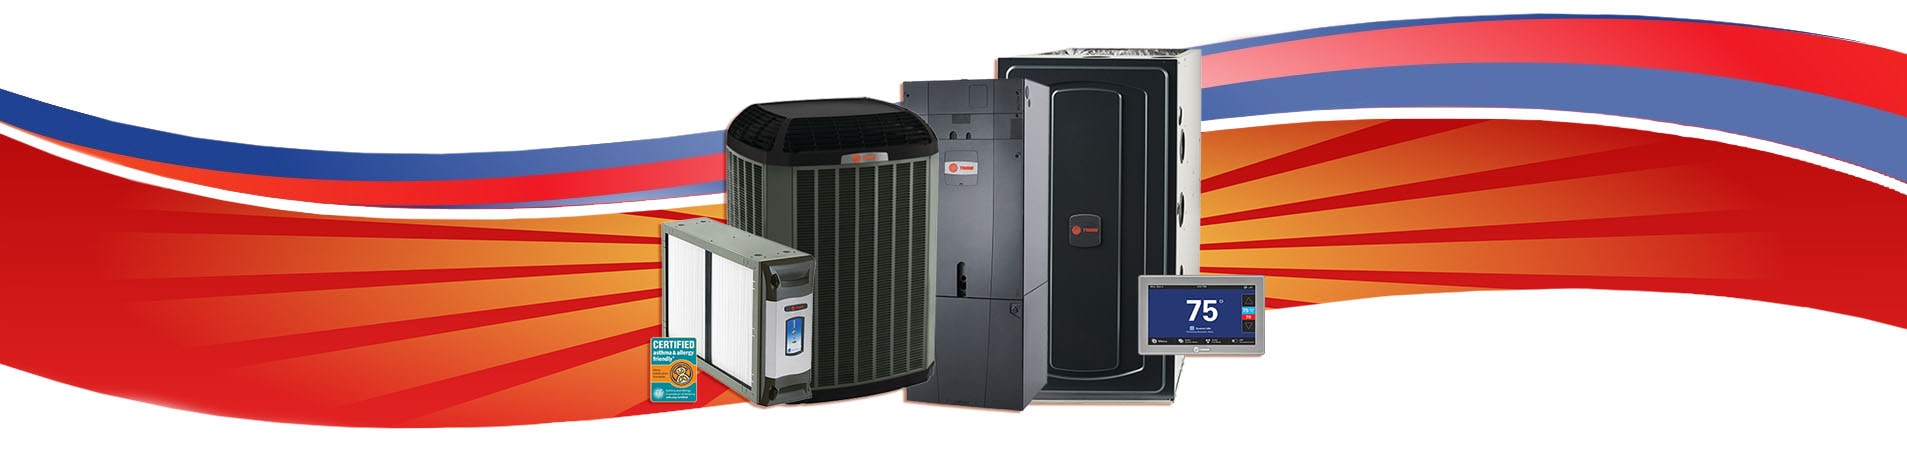 Trane Cooling service in Hoffman Estates IL is our speciality.